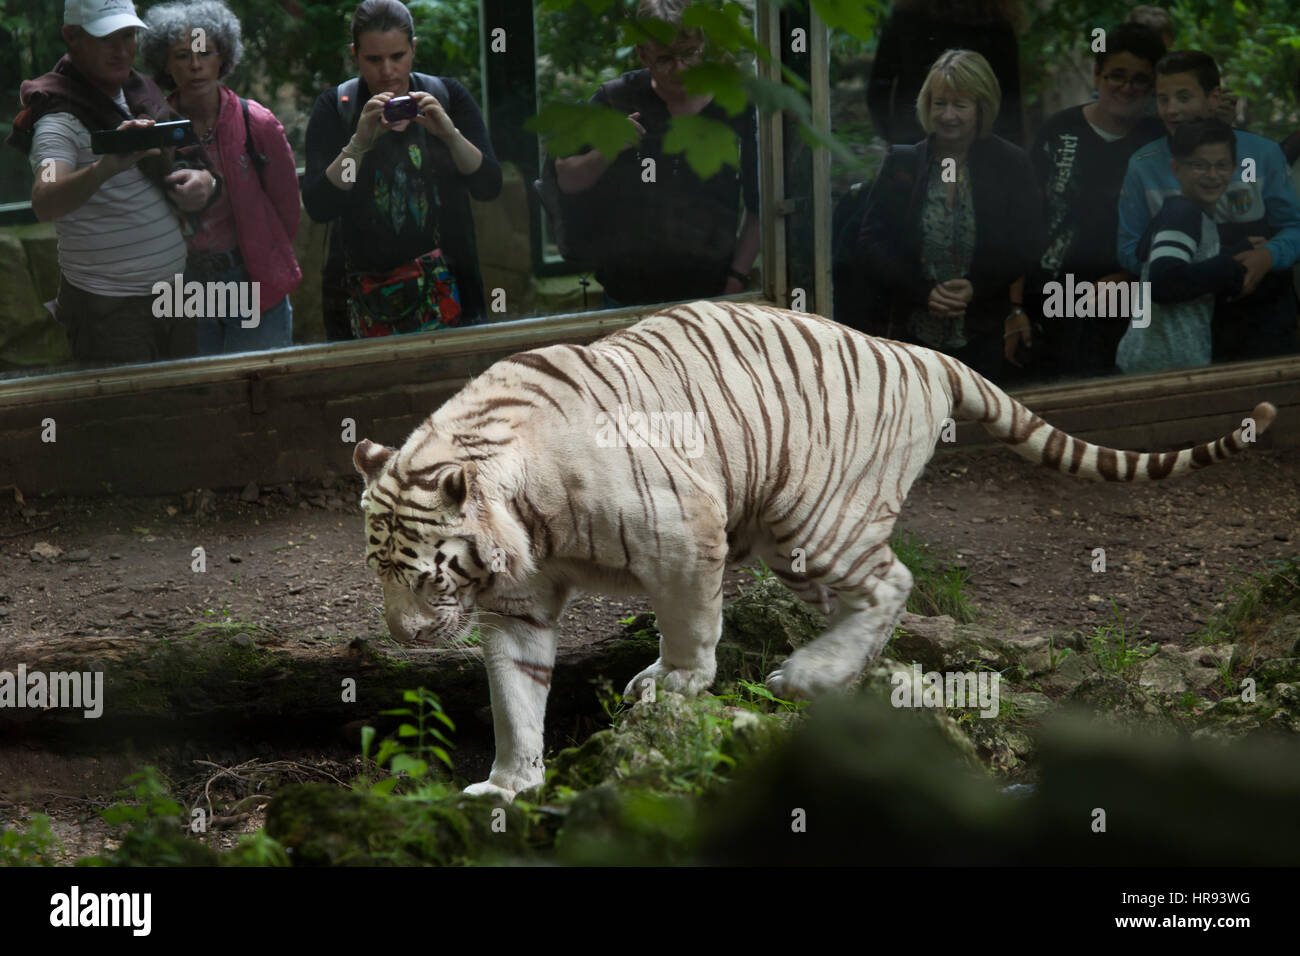 Visitors look as the white tiger (Panthera tigris tigris) walking in its enclosure at Beauval Zoo in Saint-Aignan sur Cher, Loir-et-Cher, France. Stock Photo